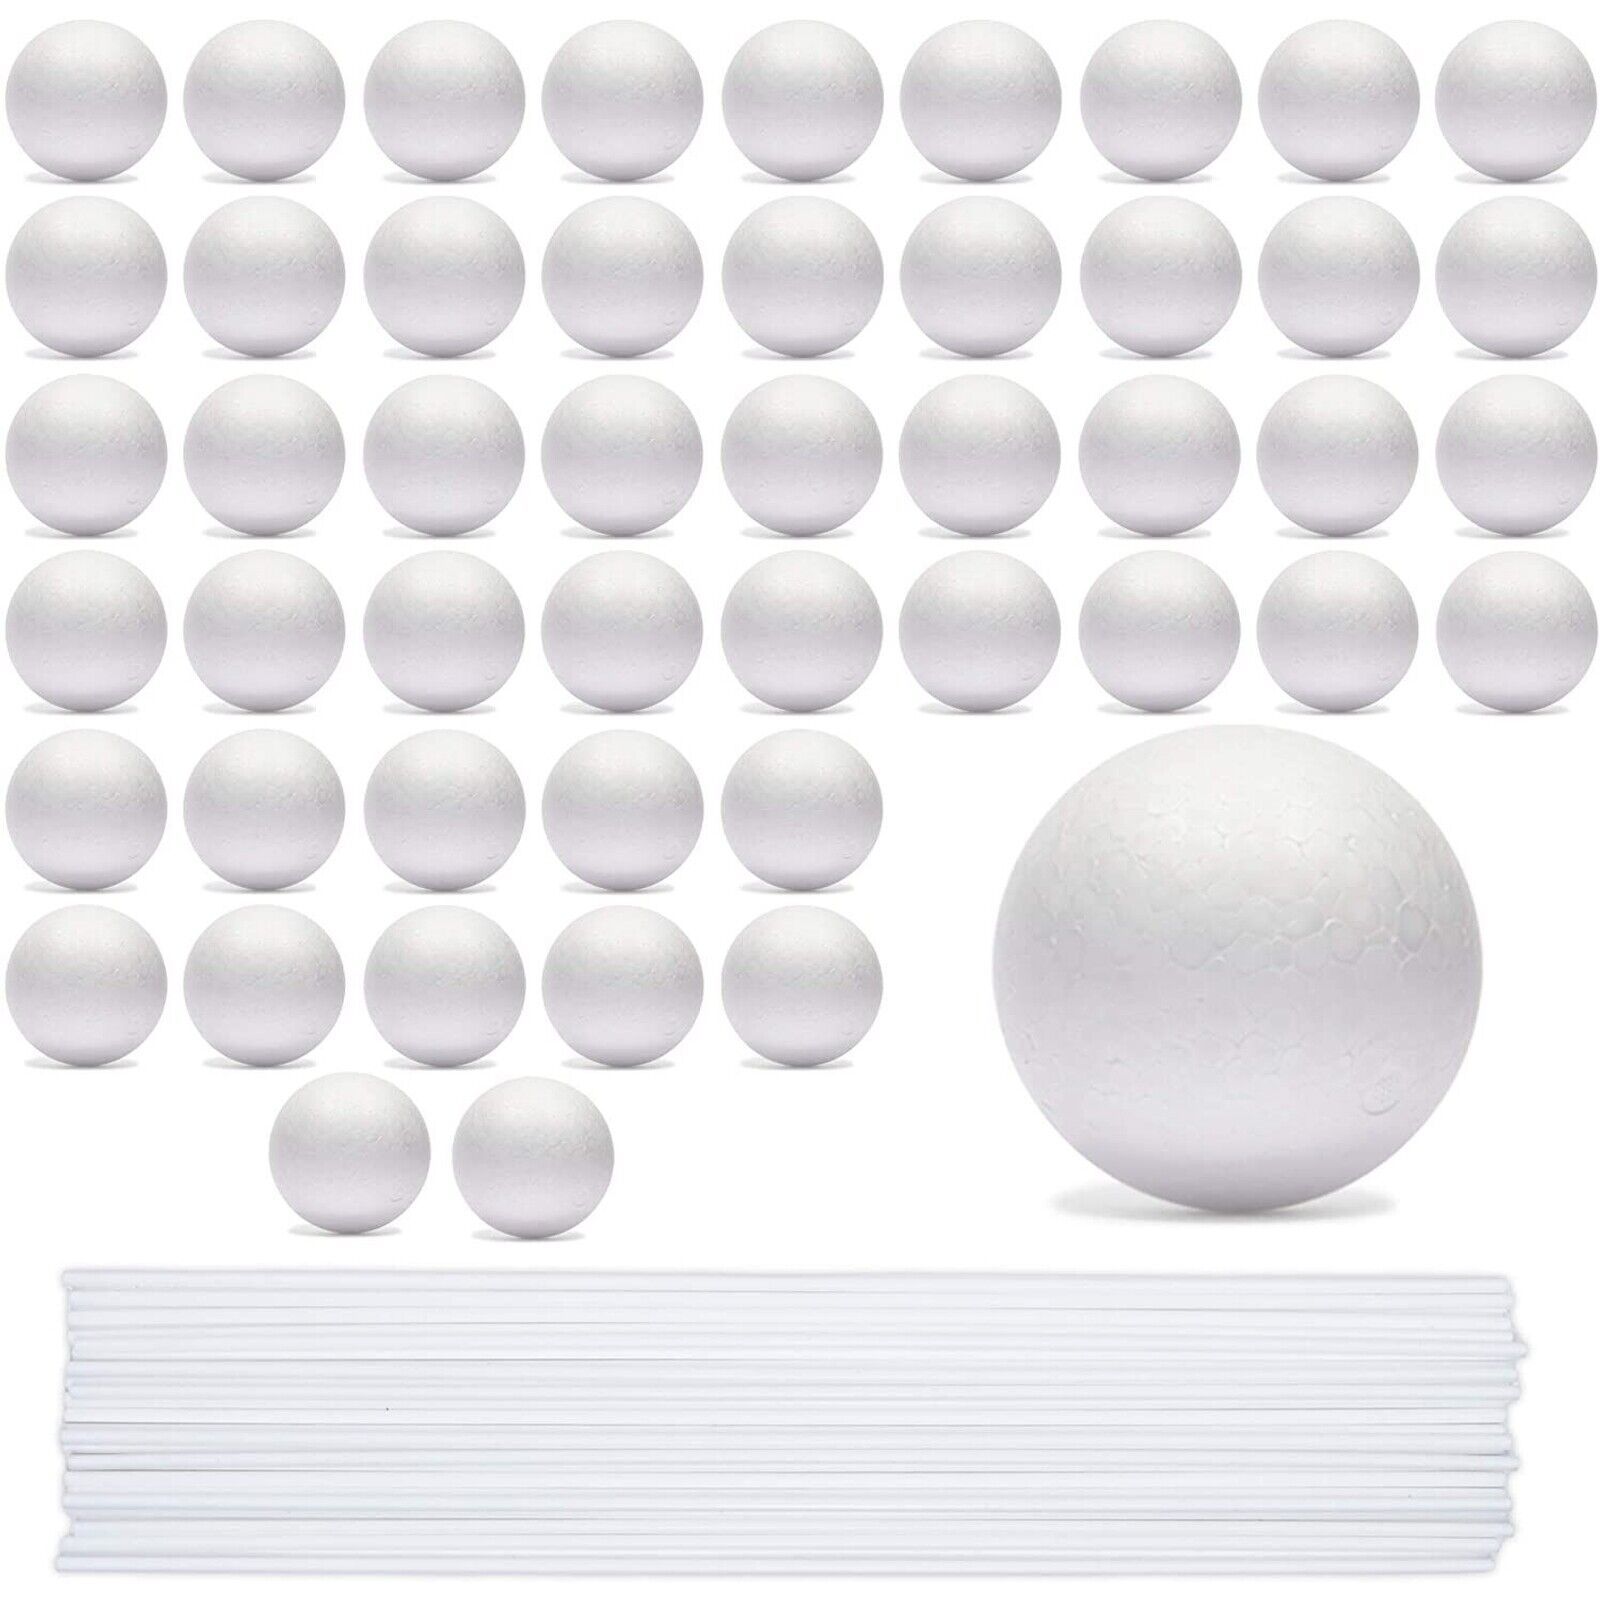 Primary image for 24 Foam Balls And 24 Dowels Set For Diy Arts And Crafts (48 Pieces)